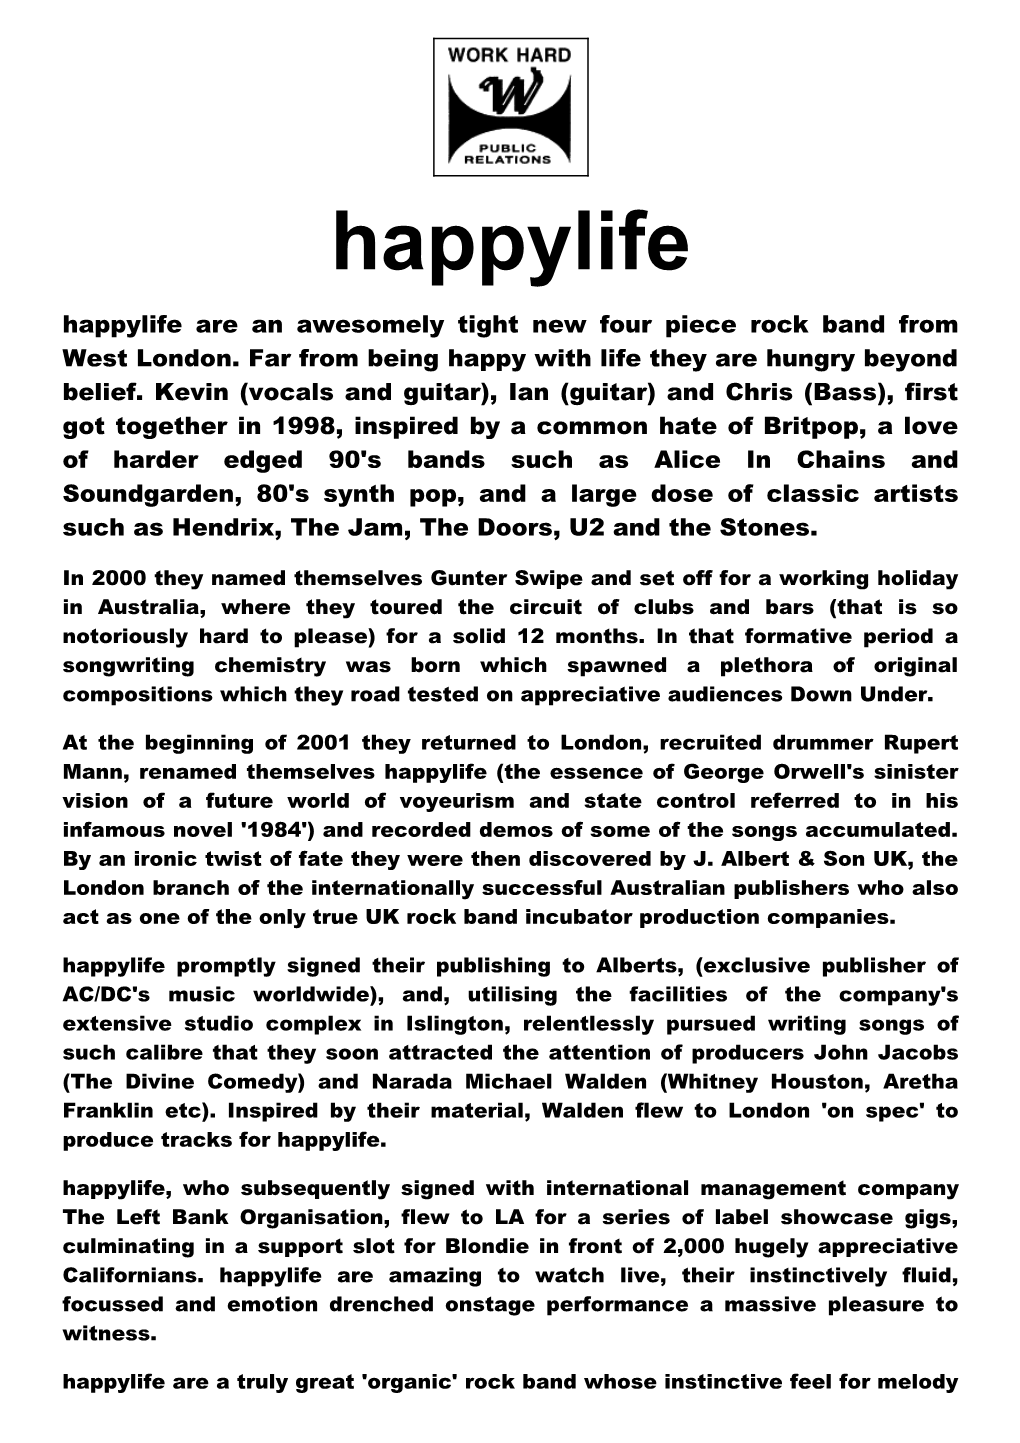 Happylife Are an Awesomely Tight New Four Piece Rock Band from West London. Far from Being